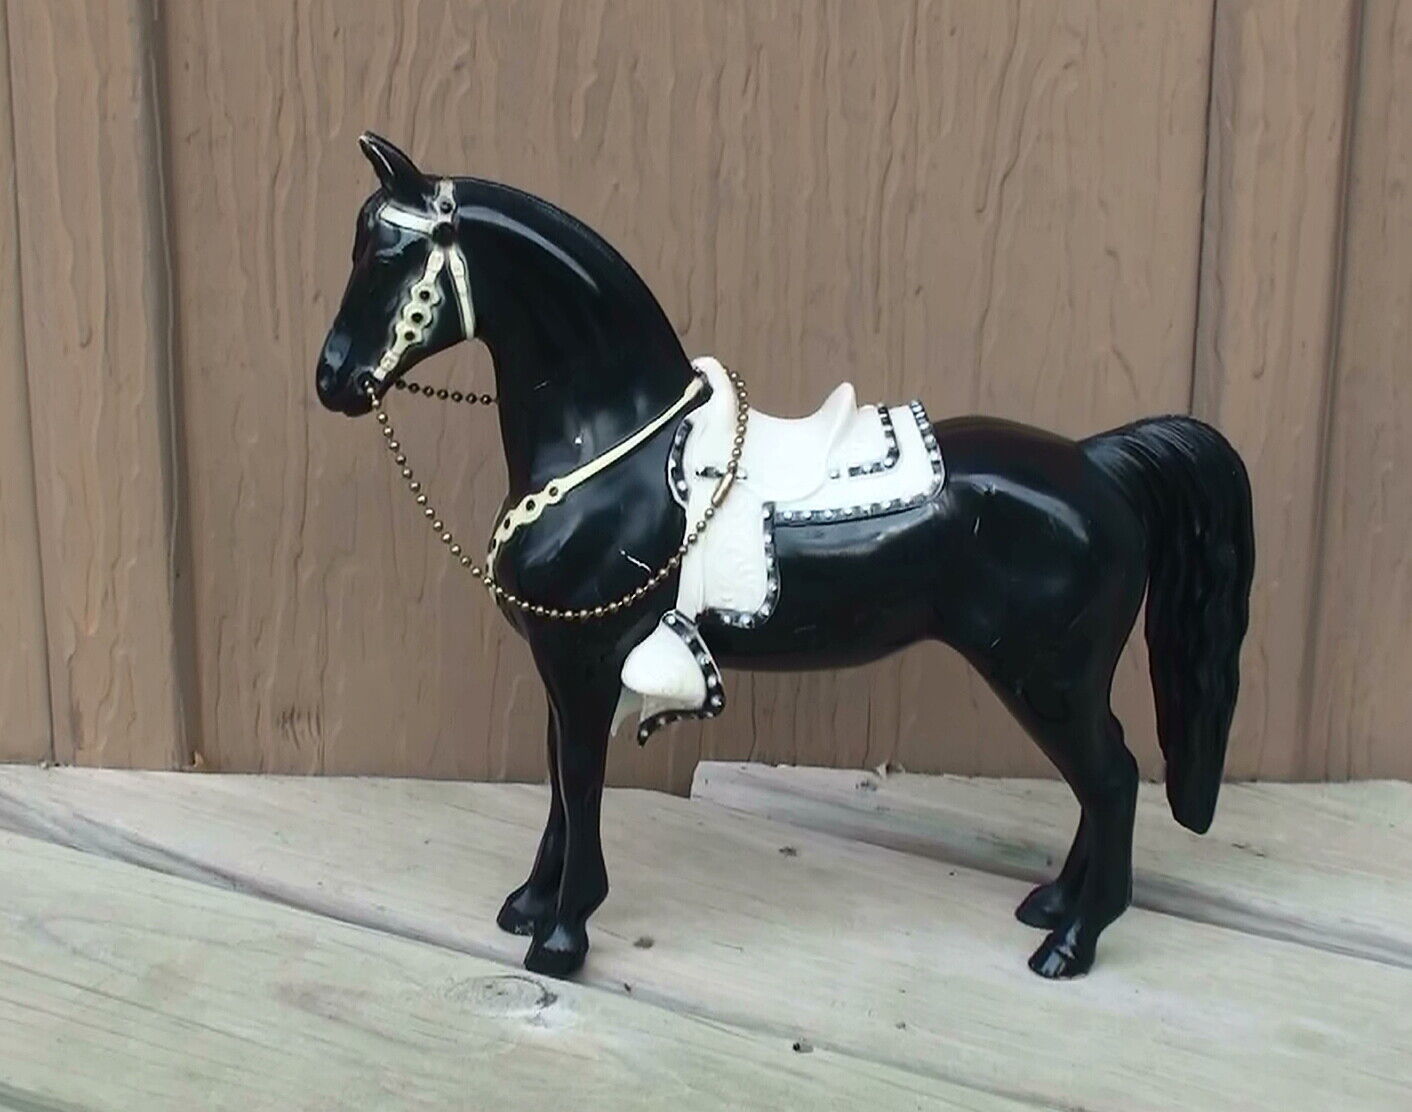 HARTLAND  1950s 10 INCH  LARGE CHAMP WITH WHITE TACK  VERY RARE - $300.00  